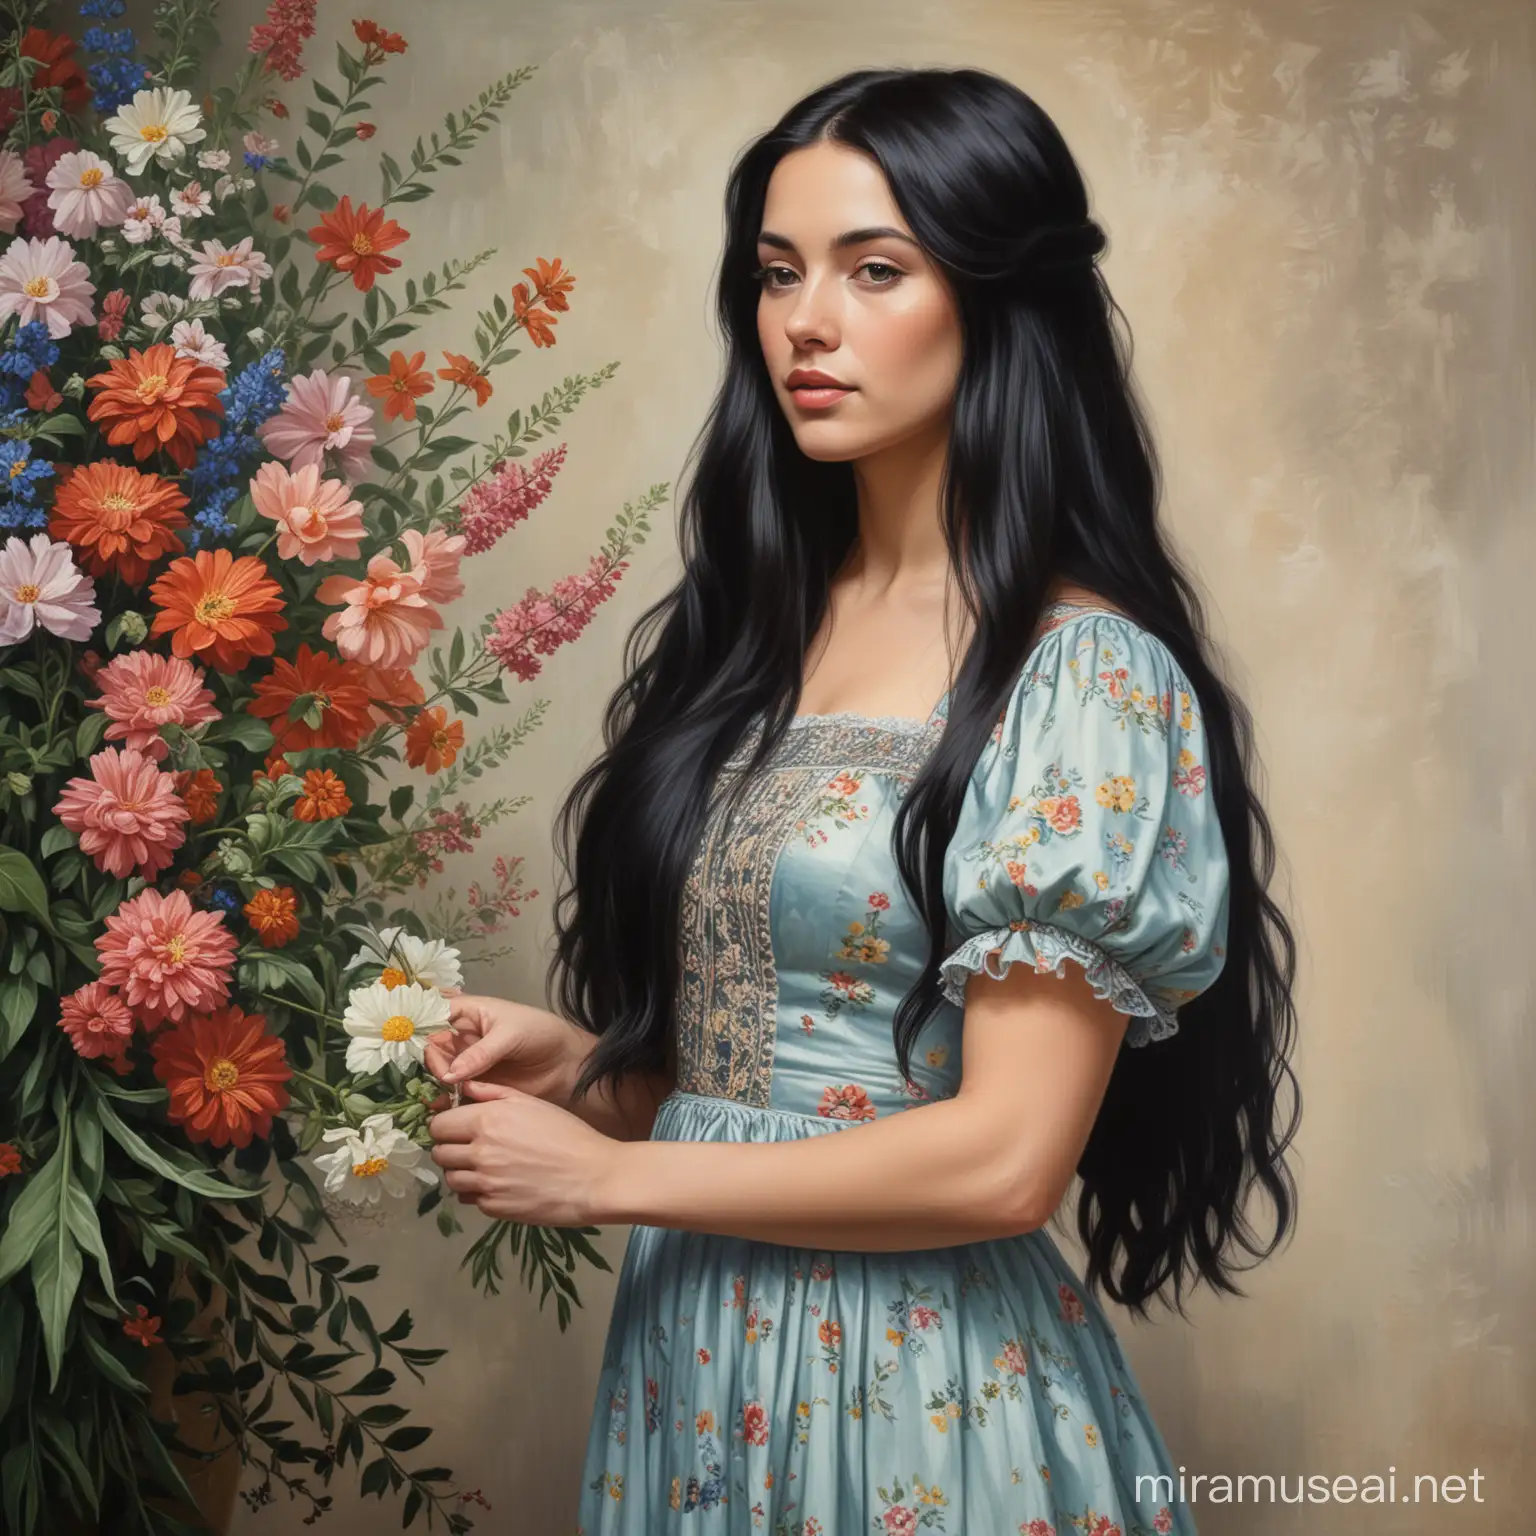 Oil Painting of a women with long black
 hair in a vintage dress looking to the side with flowers in her hand